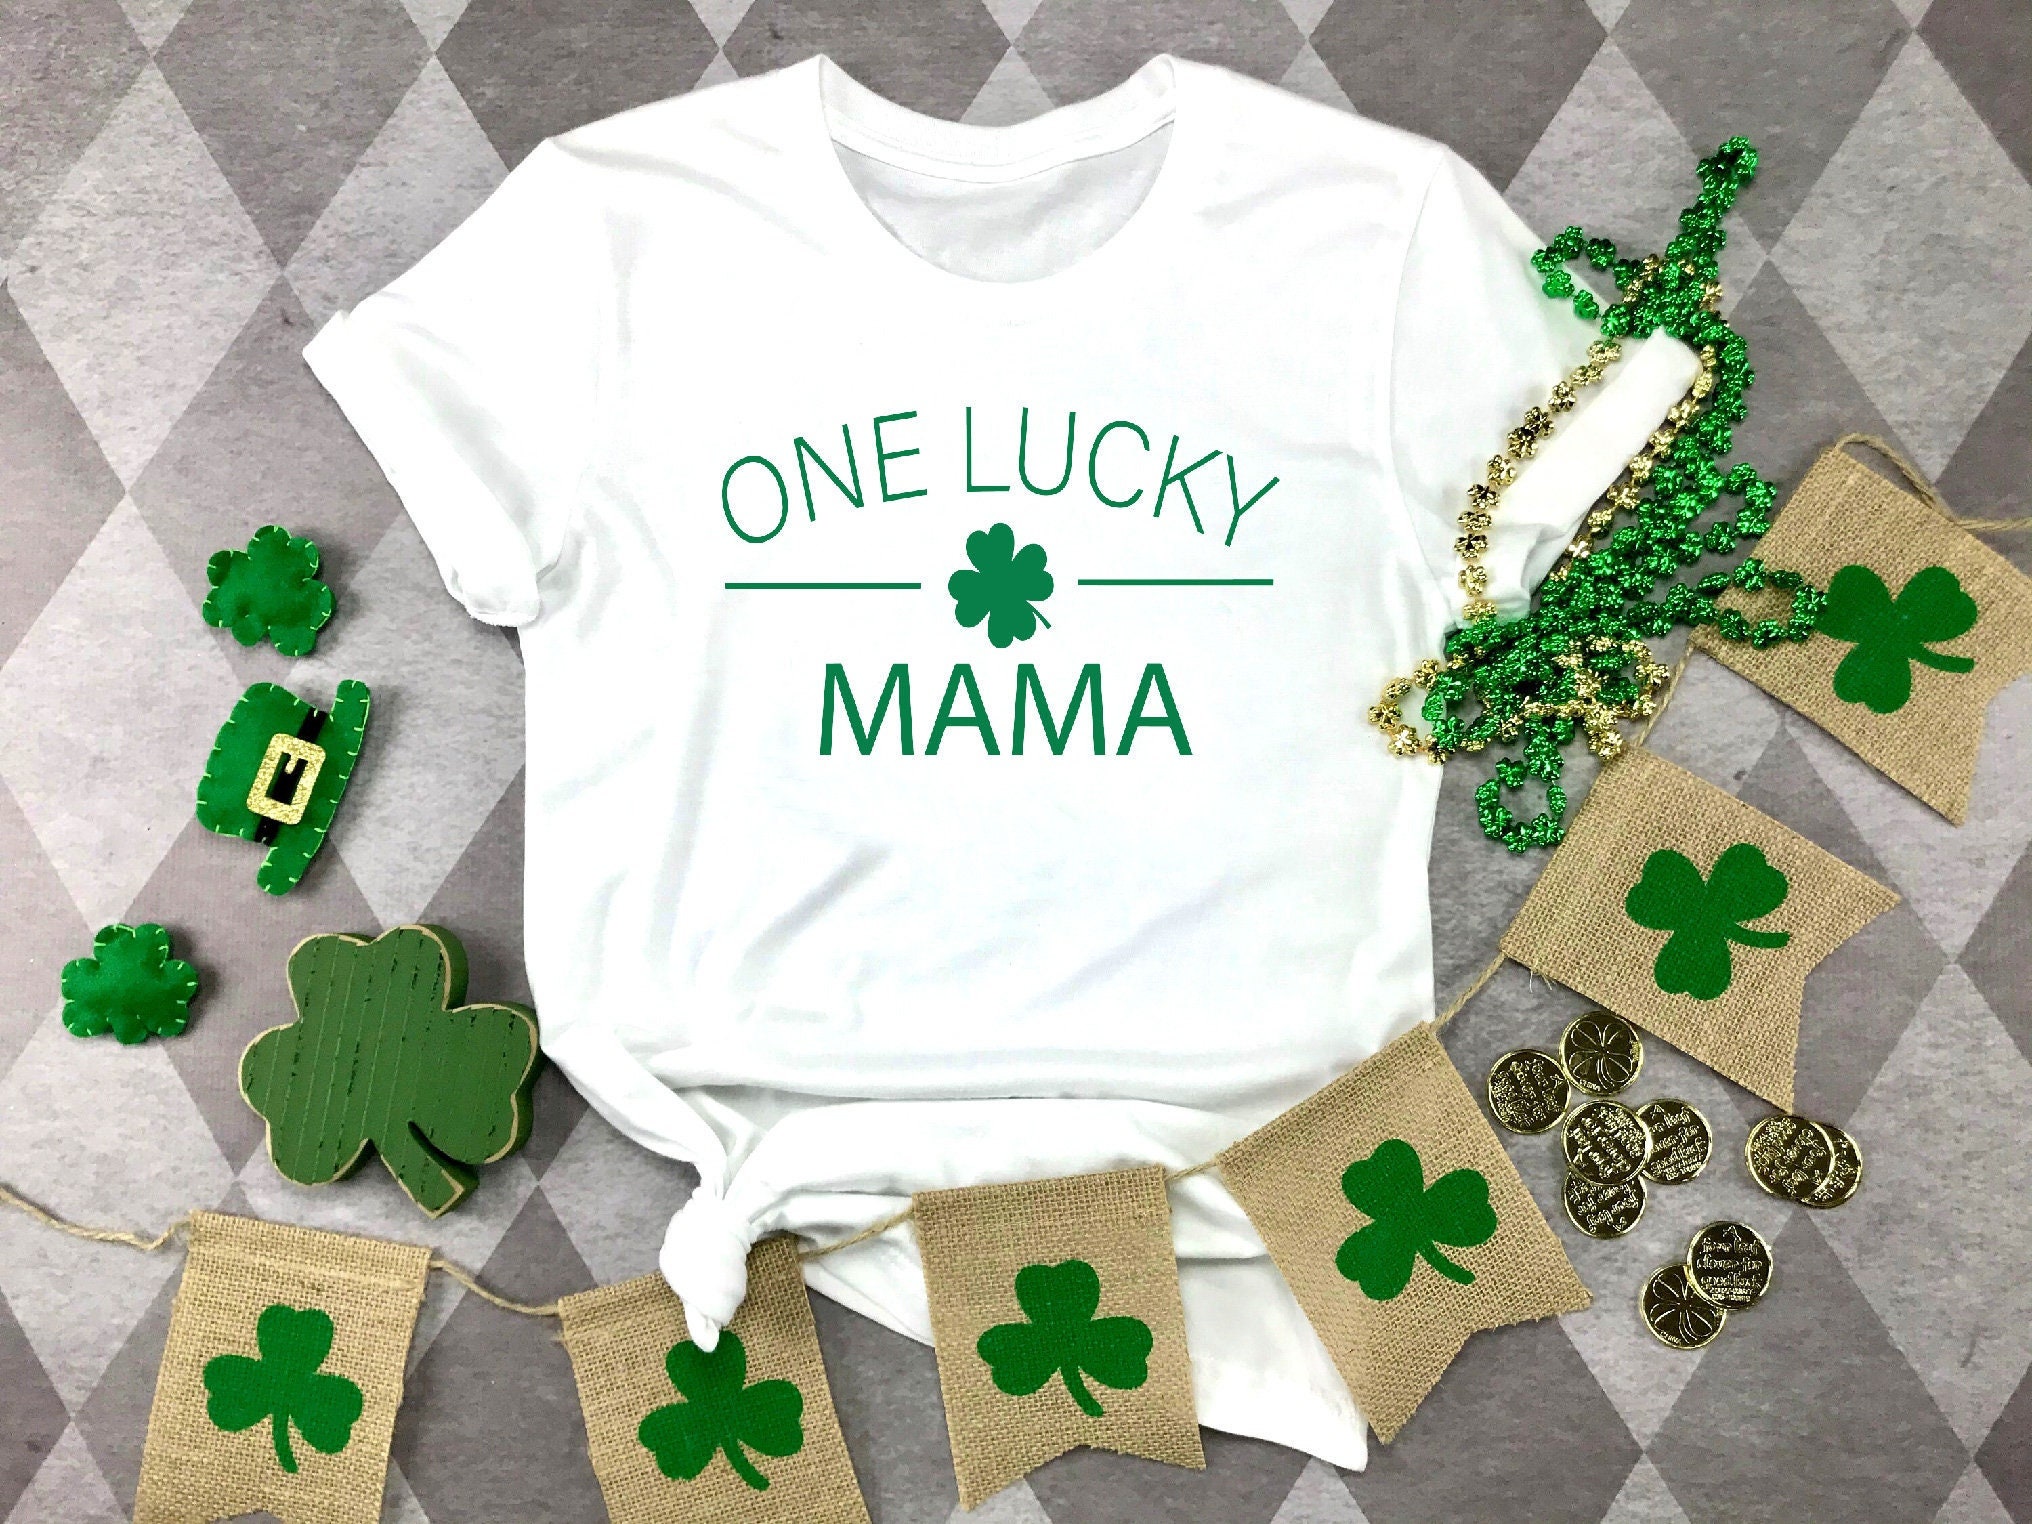 Discover One Lucky Mama Shirt,Womens St Pattys T-shirt ,Womens St Paddys